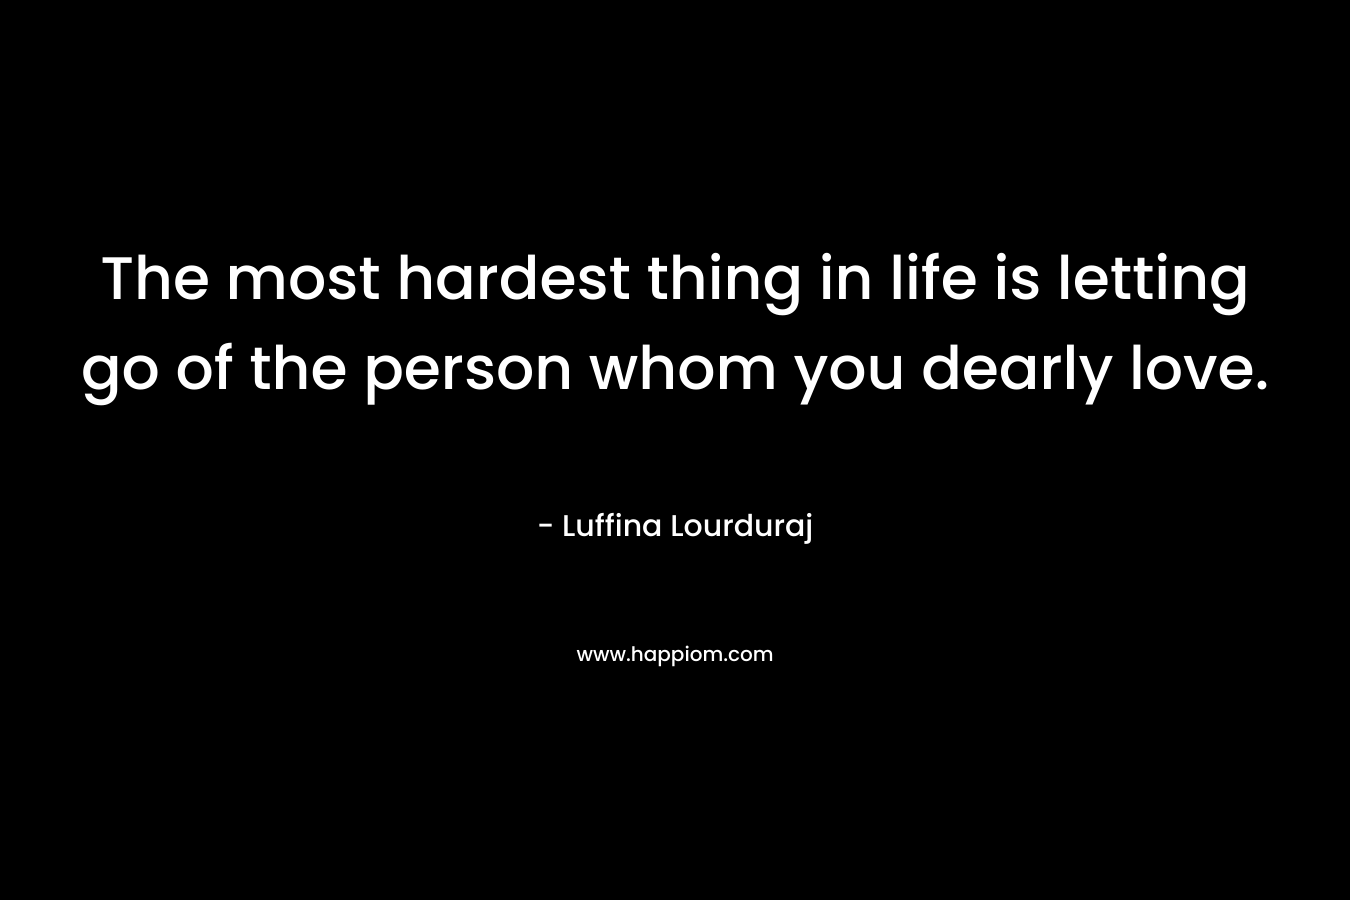 The most hardest thing in life is letting go of the person whom you dearly love.